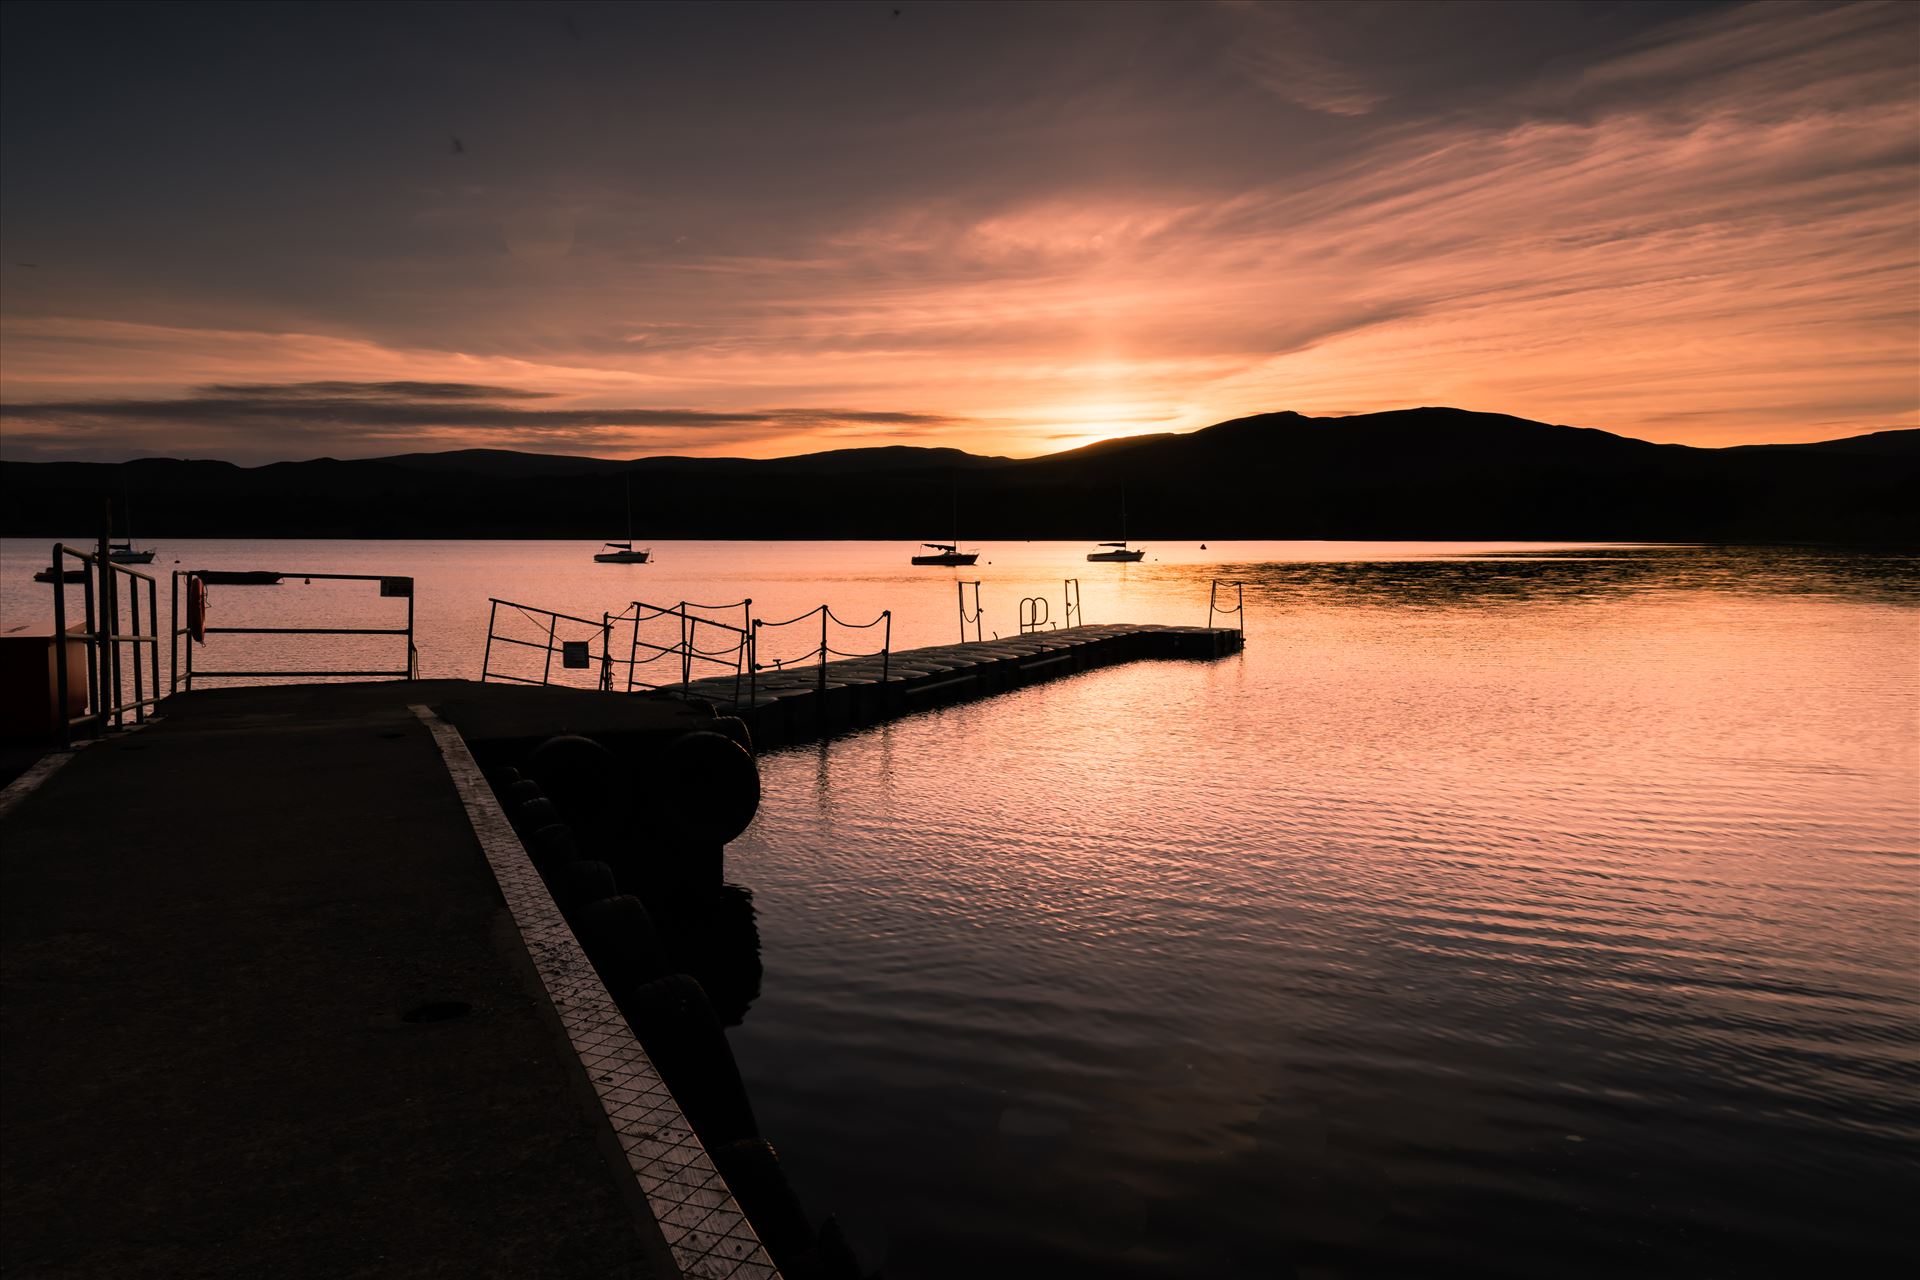 Sunset at Loch Insh, nr Aviemore  by philreay